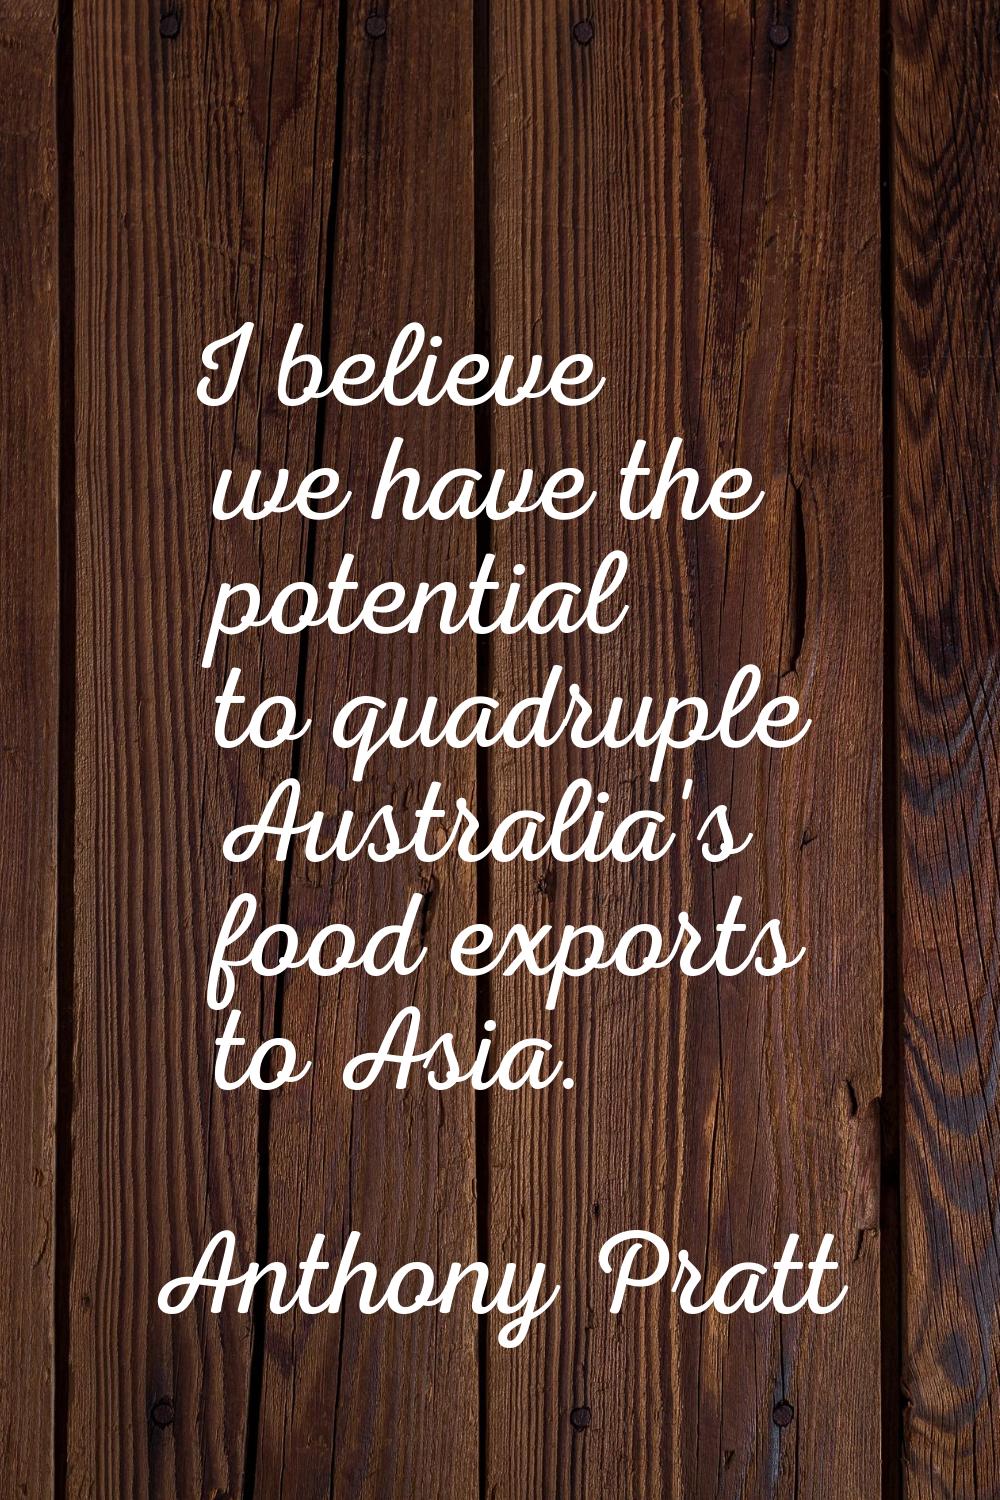 I believe we have the potential to quadruple Australia's food exports to Asia.